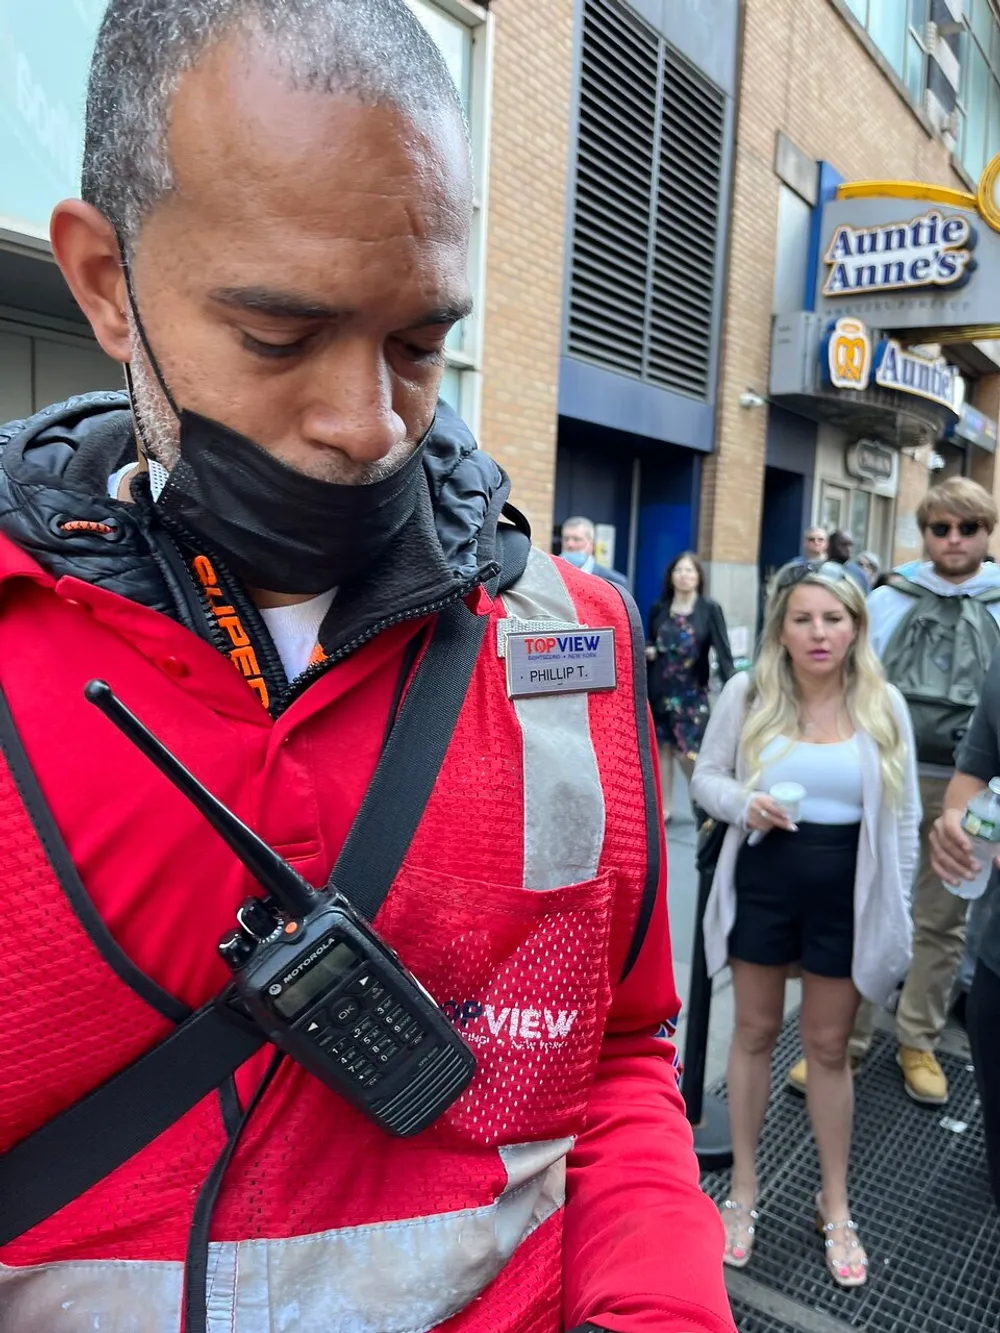 A person wearing a red vest with a TOP VIEW logo looks downwards while a two-way radio hangs on the front and in the background other individuals appear to be walking on a city street